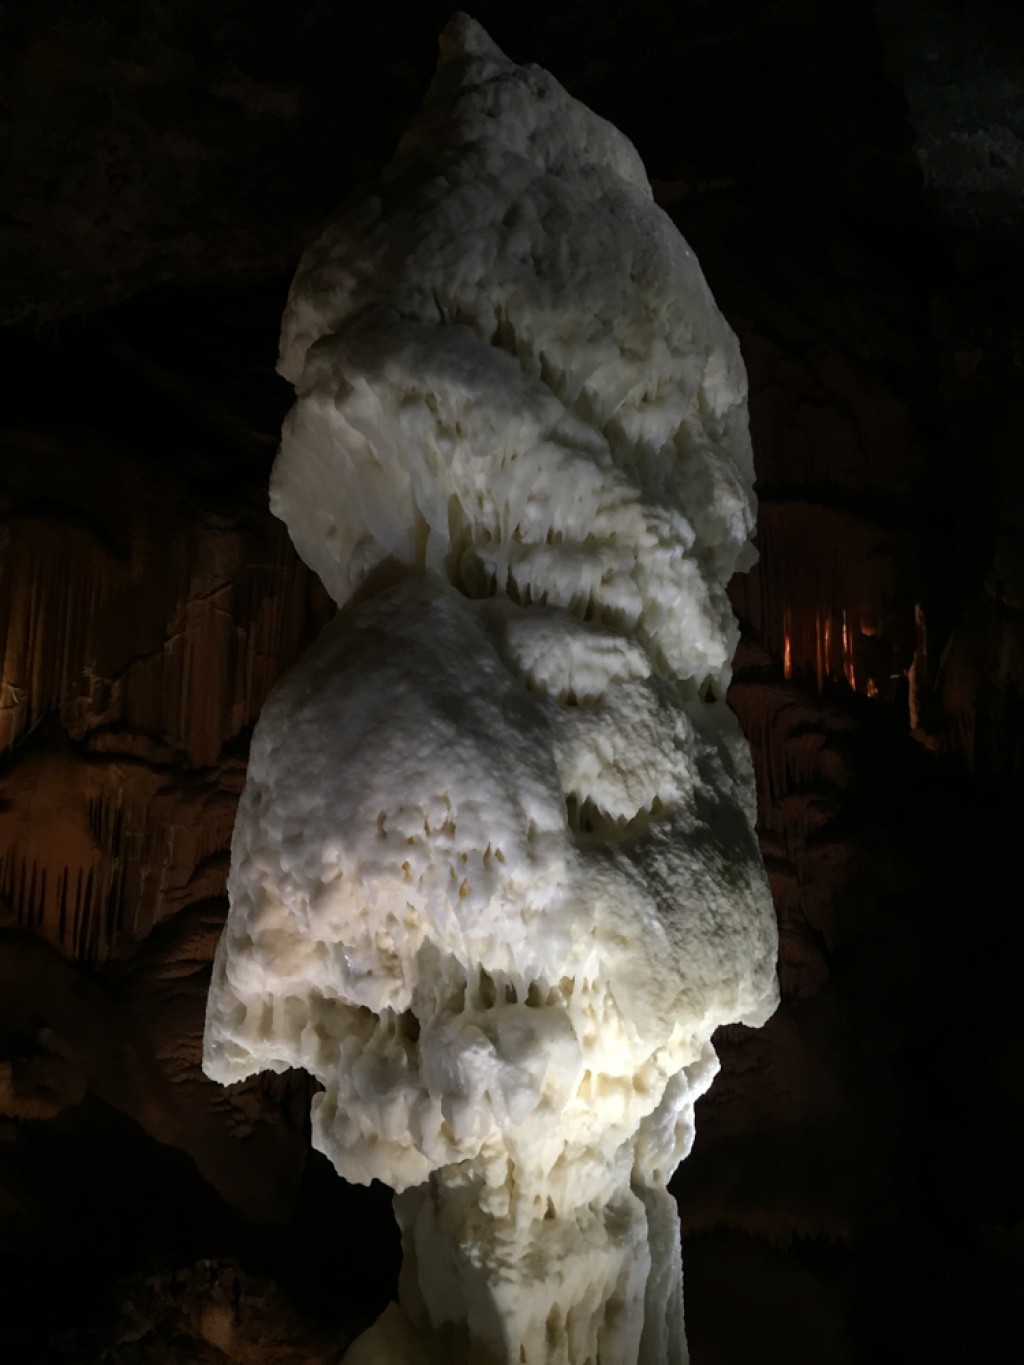 The most beautiful caves in the world we've seen are just an hour outside of Ljubljana.  The size of the Skocjan caves are unbelievable, and the variety and depth of the formations on display at Postojna are amazing.